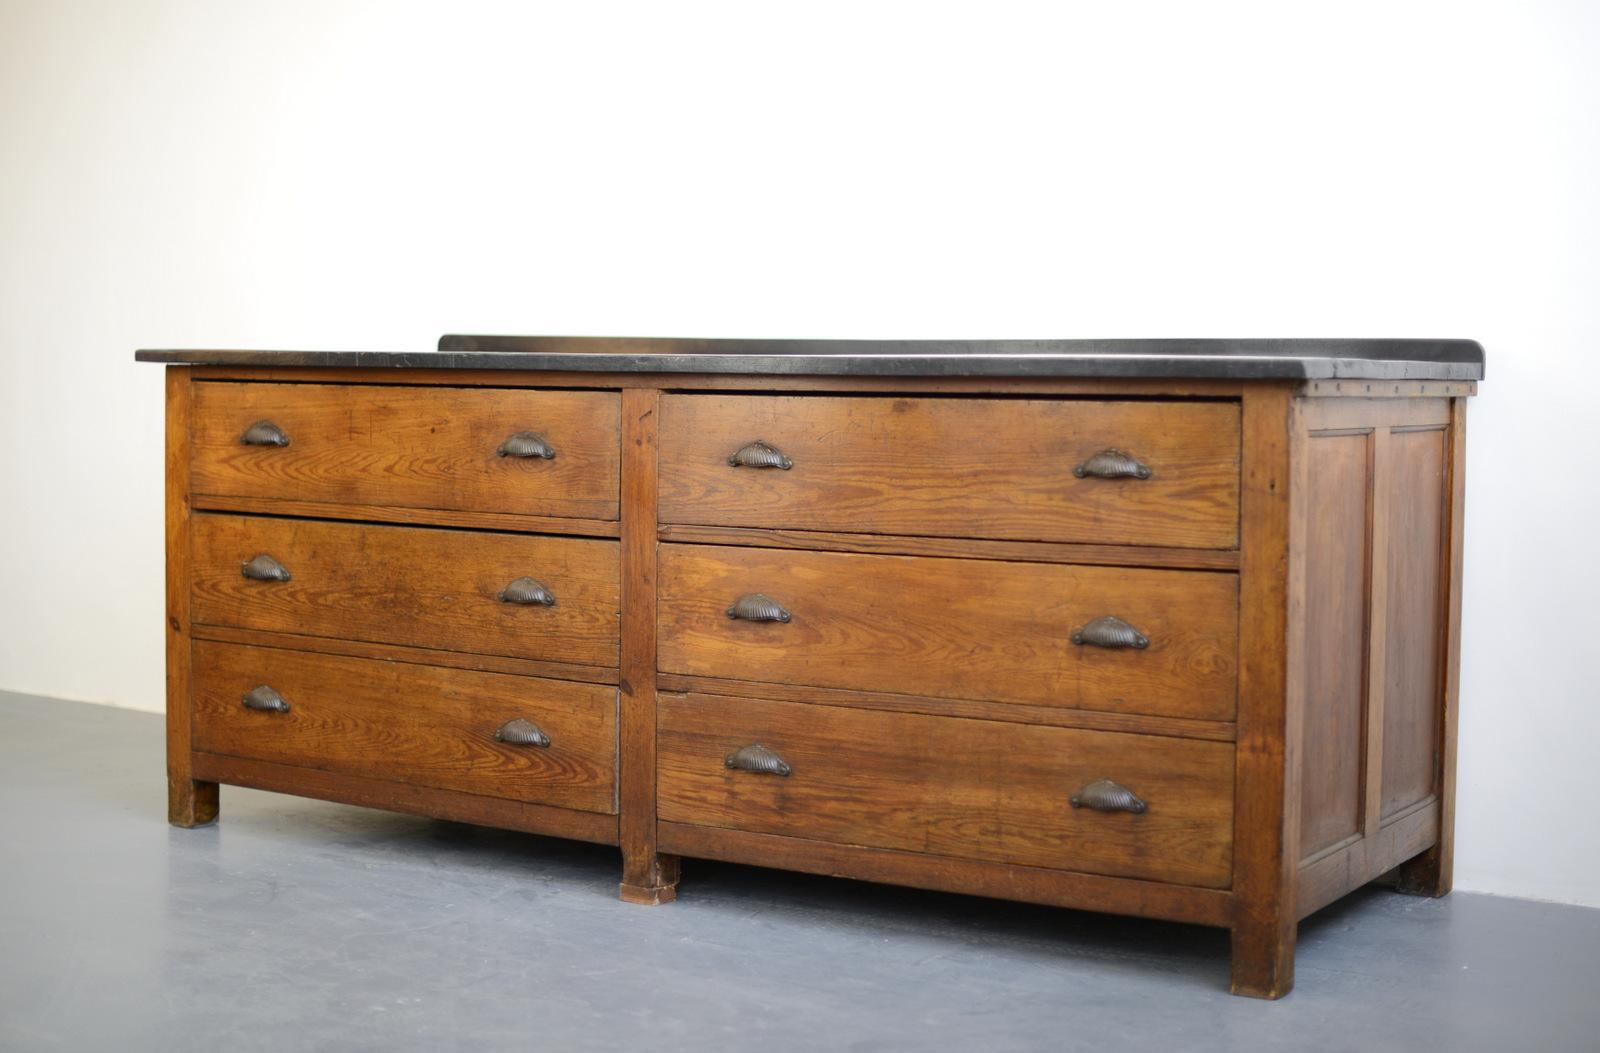 Early 20th century chemists cabinet, circa 1900

- Ebonised mahogany plank top
- Pine drawers and body
- Ornate cast iron handles
- Dovetail jointed drawers
- Originally came from a chemists in Edinburgh
- Scottish ~ 1900
- 216cm long x 86cm